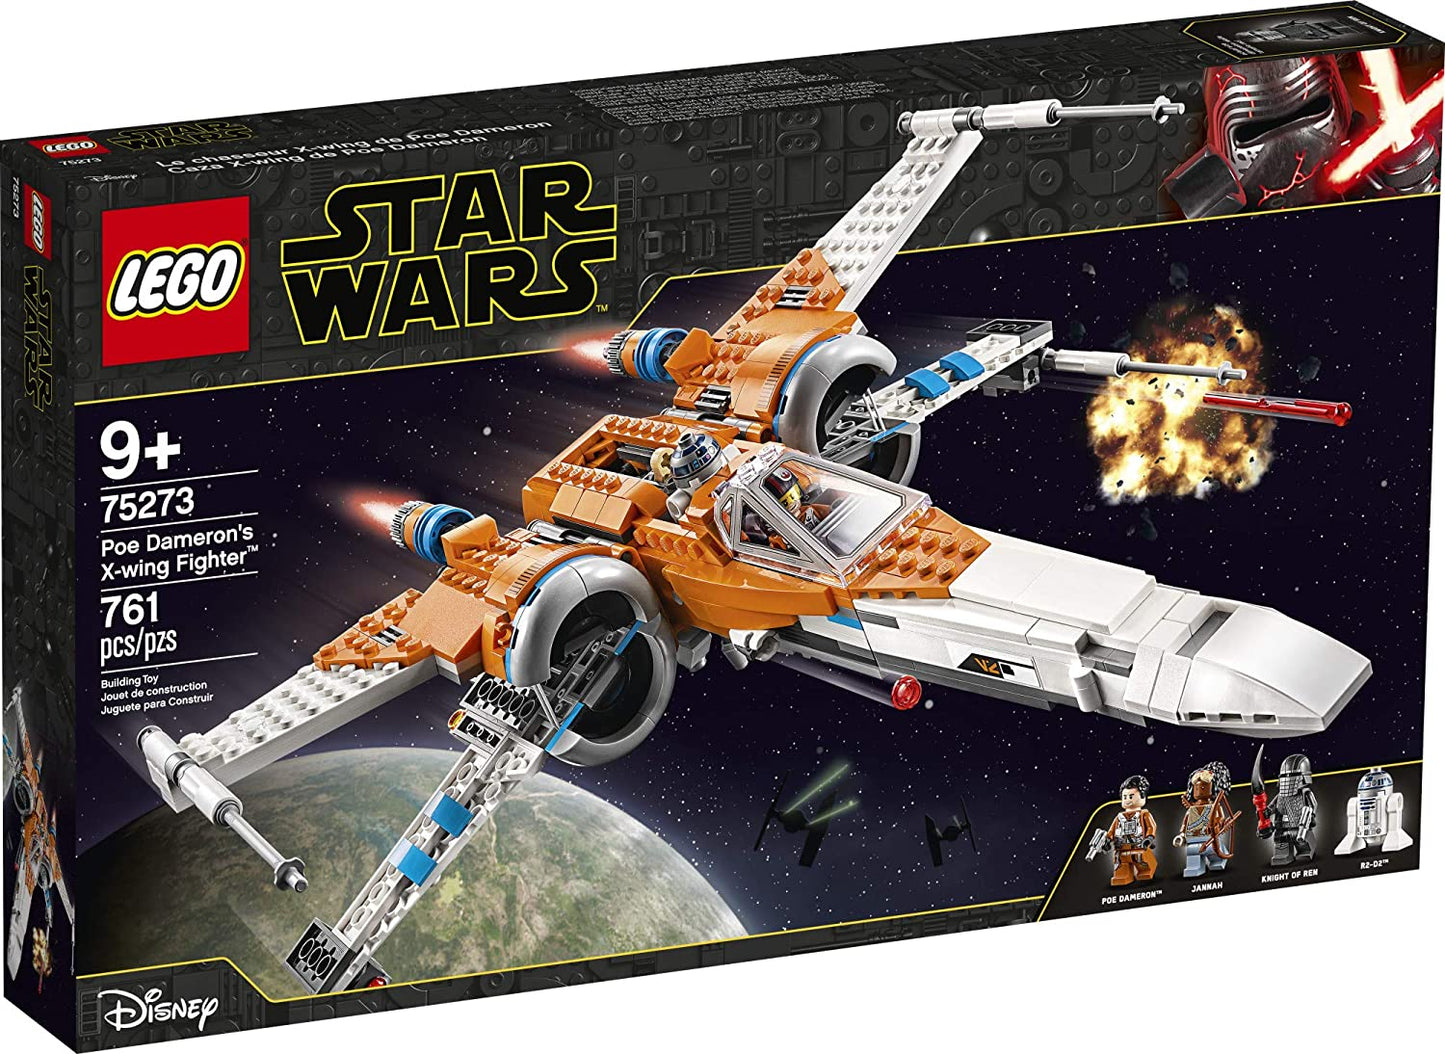 LEGO Star Wars Poe Dameron's X-wing Fighter 75273 Building Kit, Cool Construction Toy for Kids, New 2020 (761 Pieces)